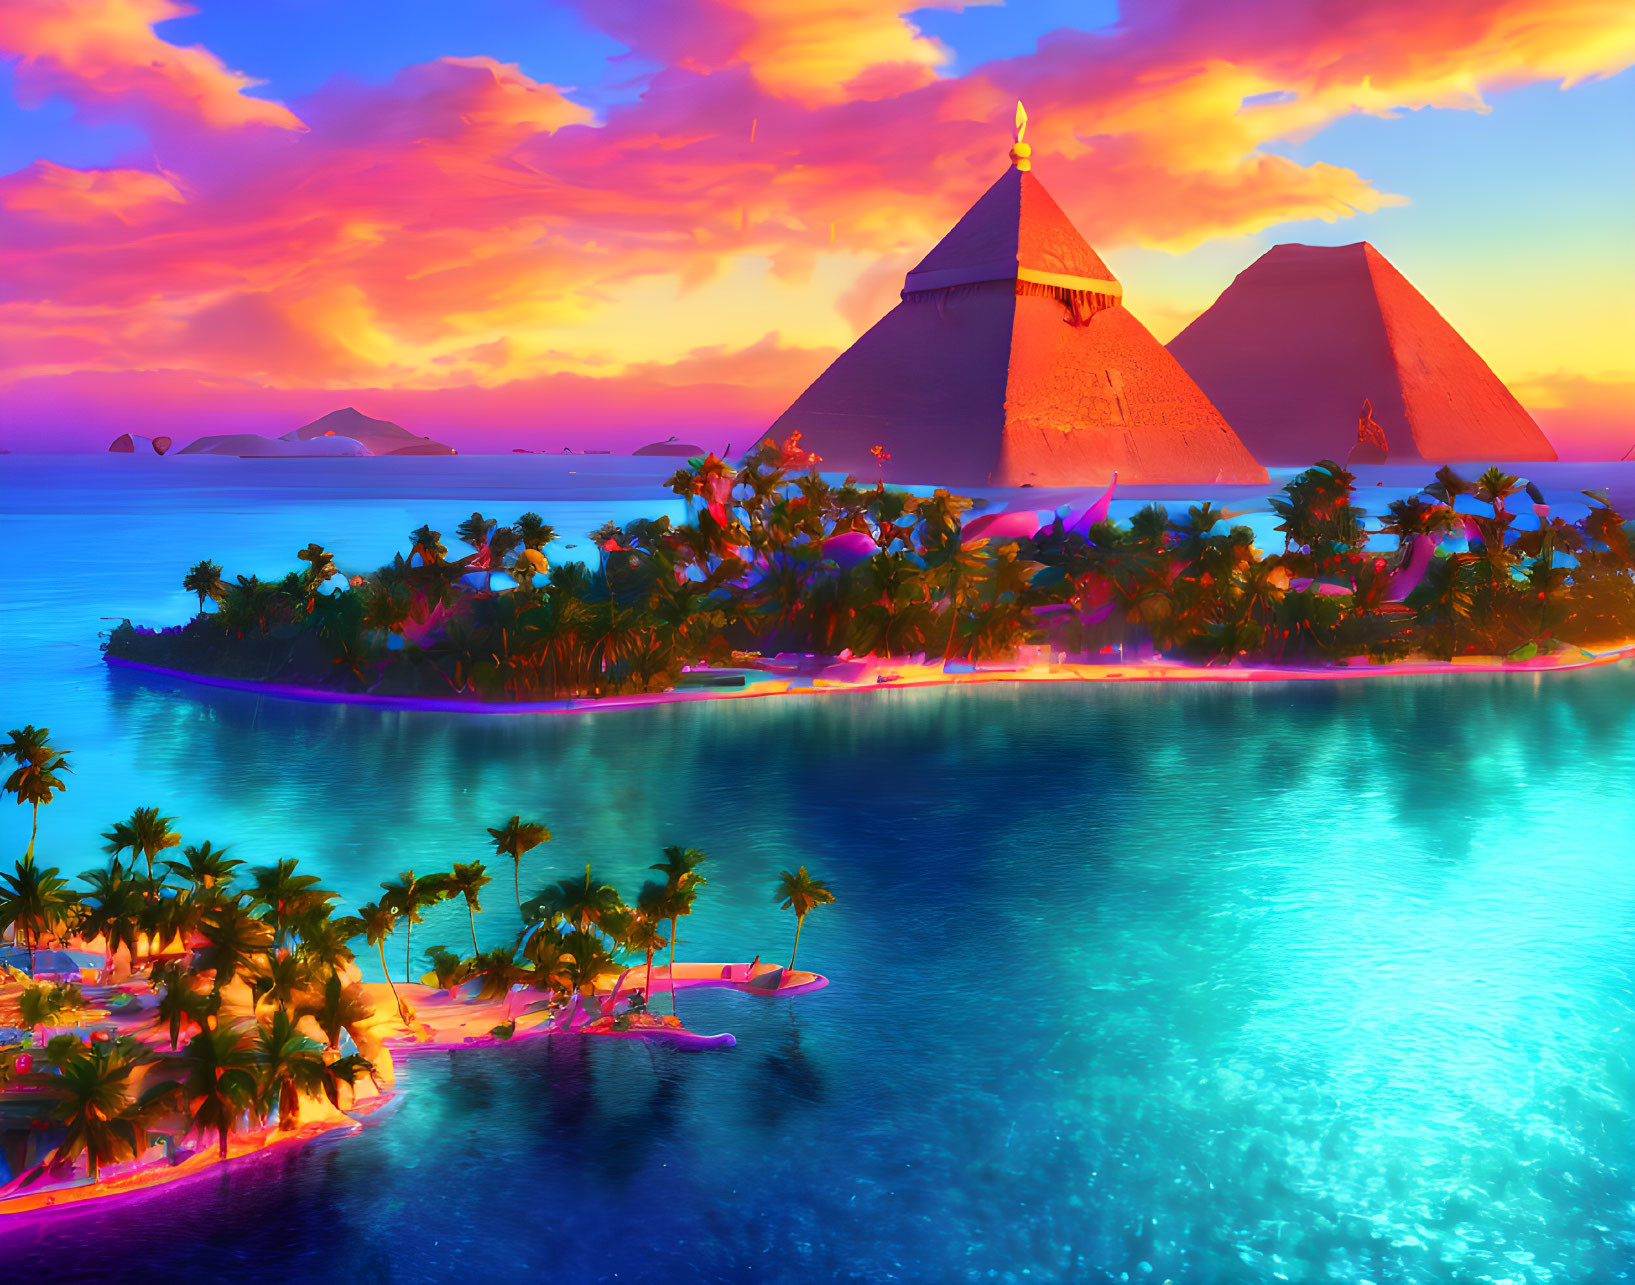 Tropical island sunset with two pyramids and palm trees